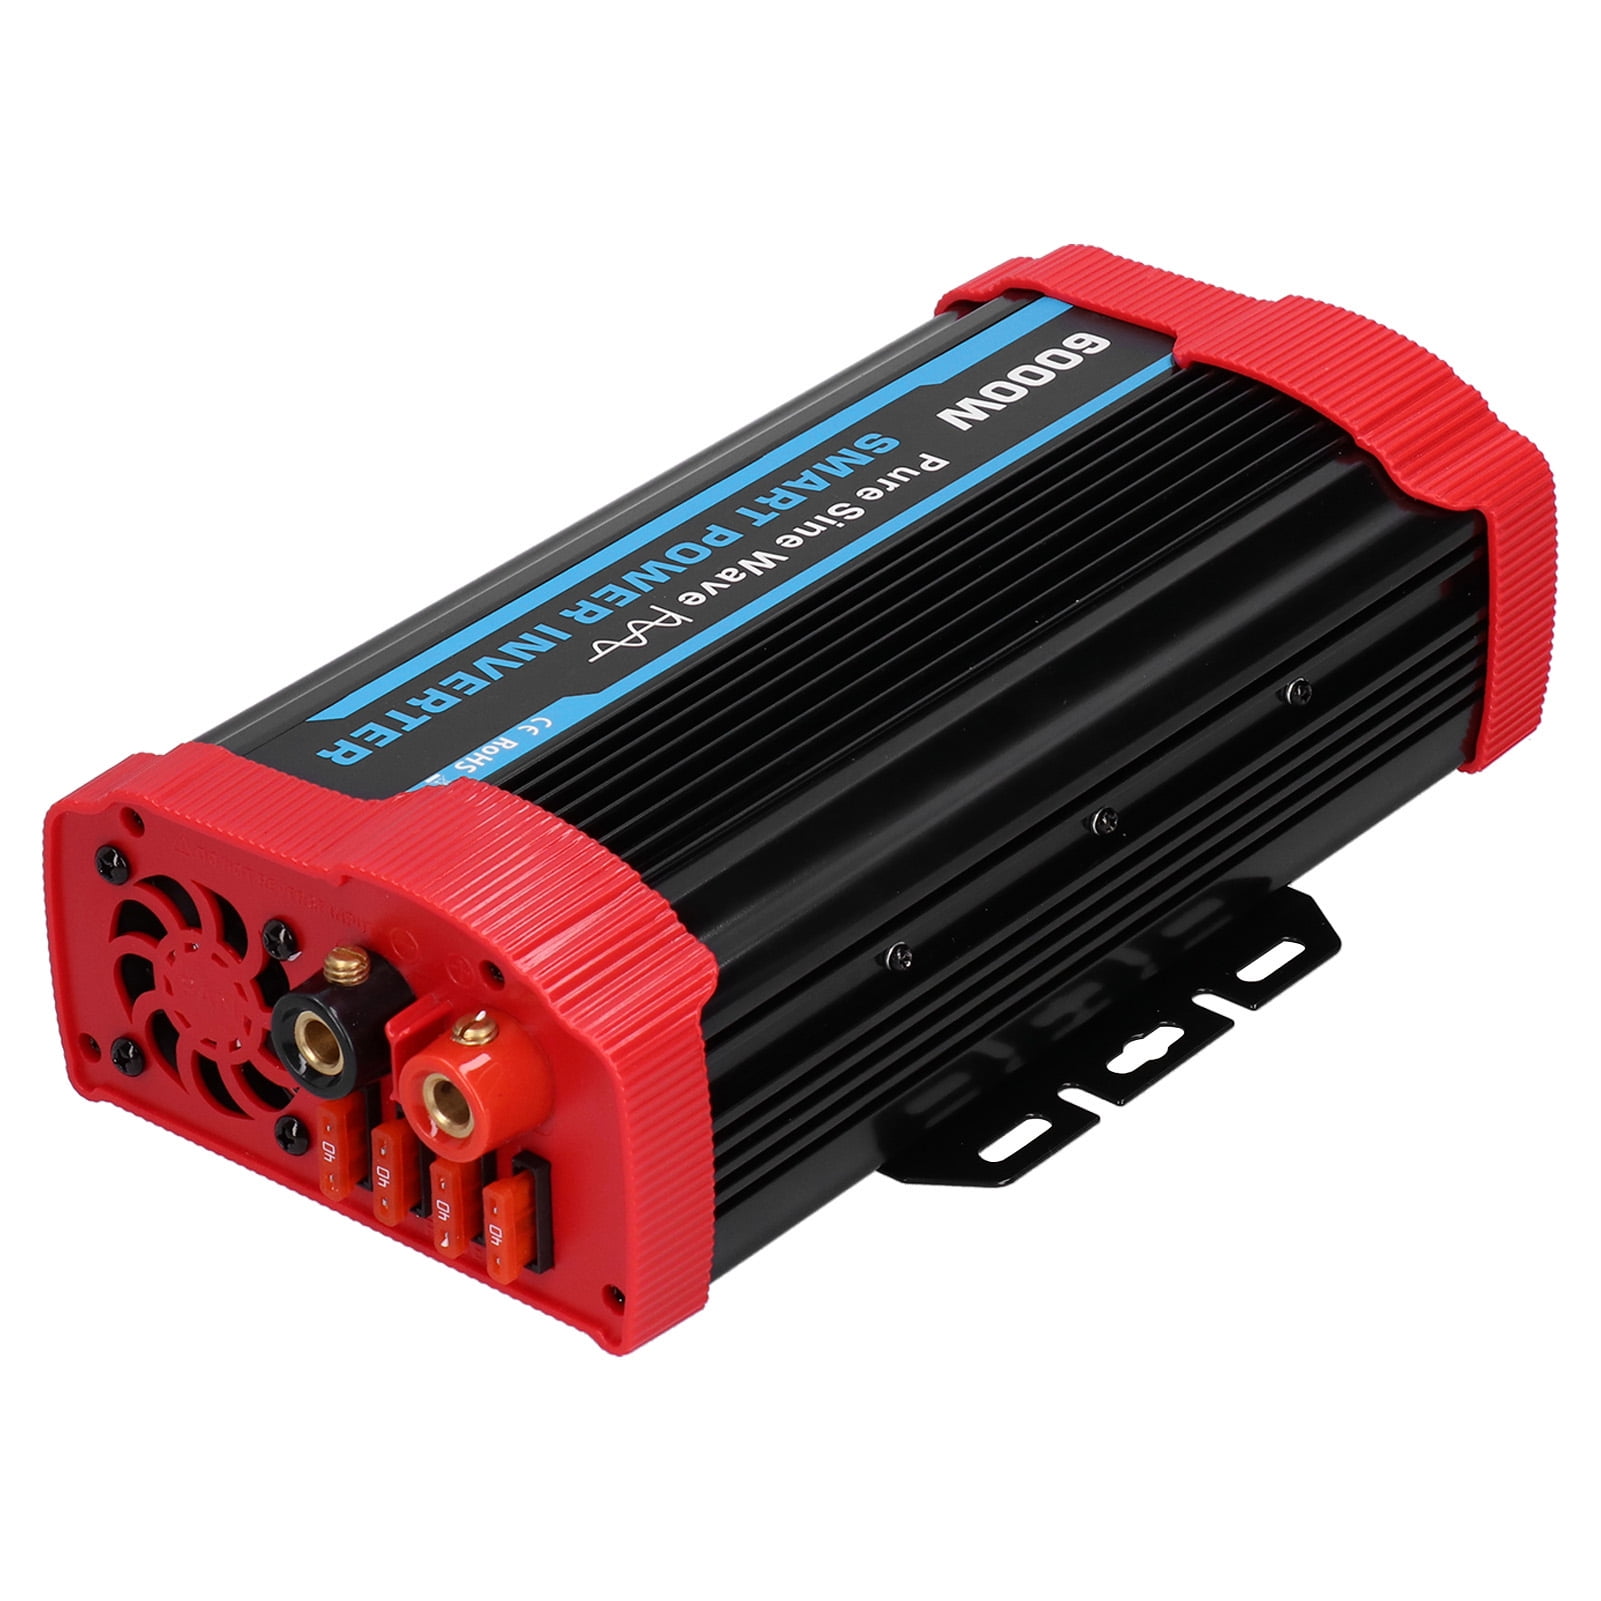 Details about   AC-DC Precision Buck Converter 220V To 3.3V~24V Switching Power supply Module 